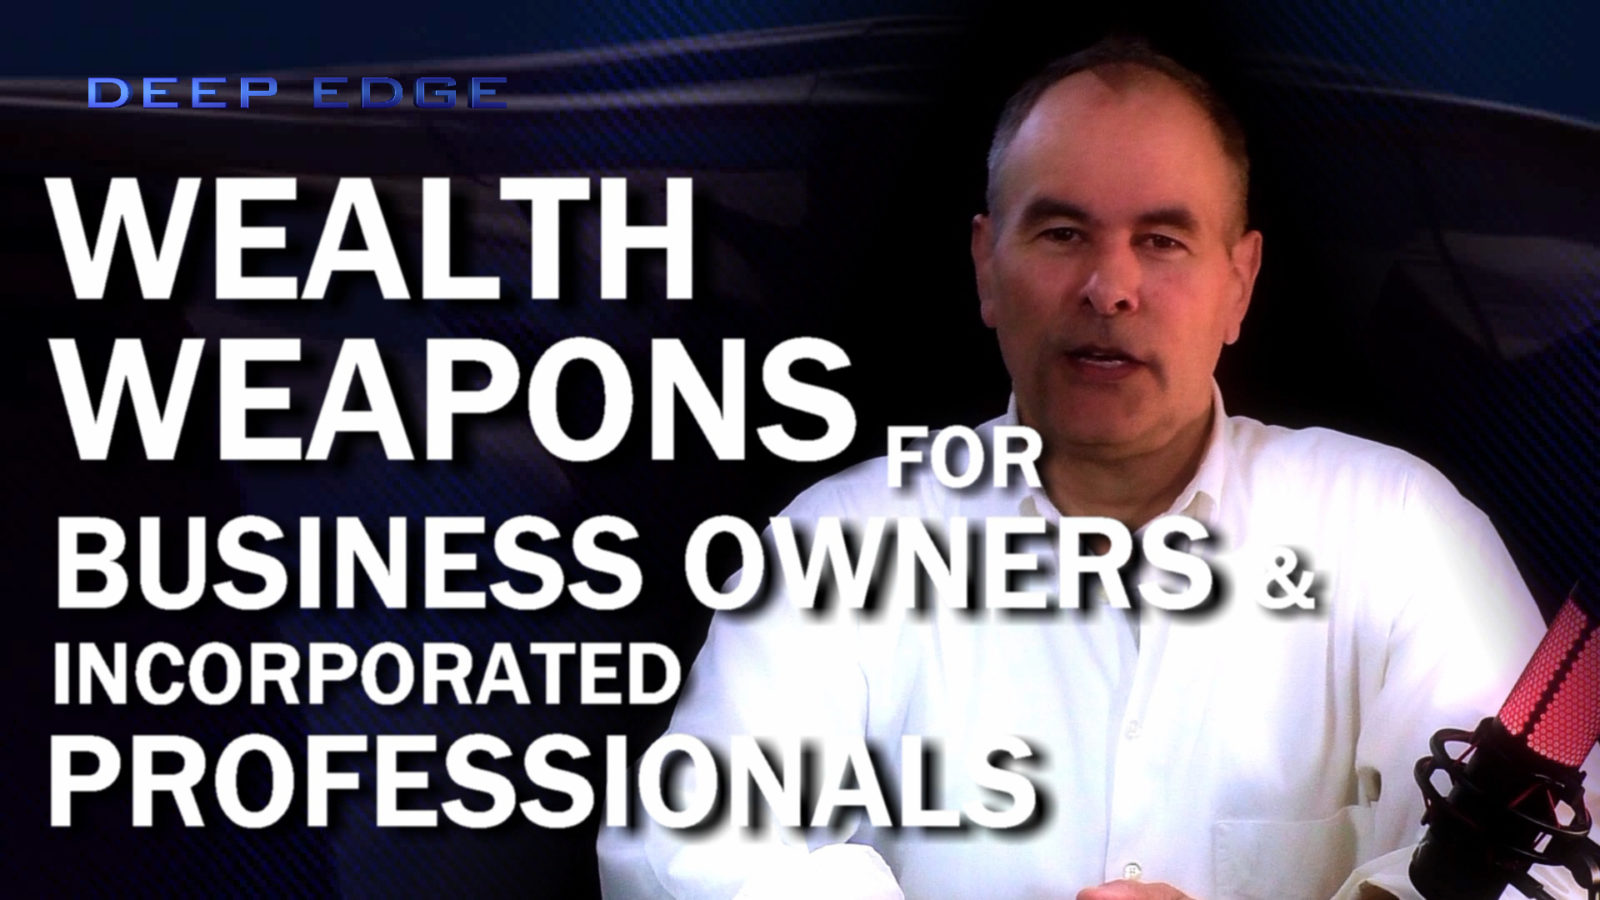 Wealth Weapons for Business Owners